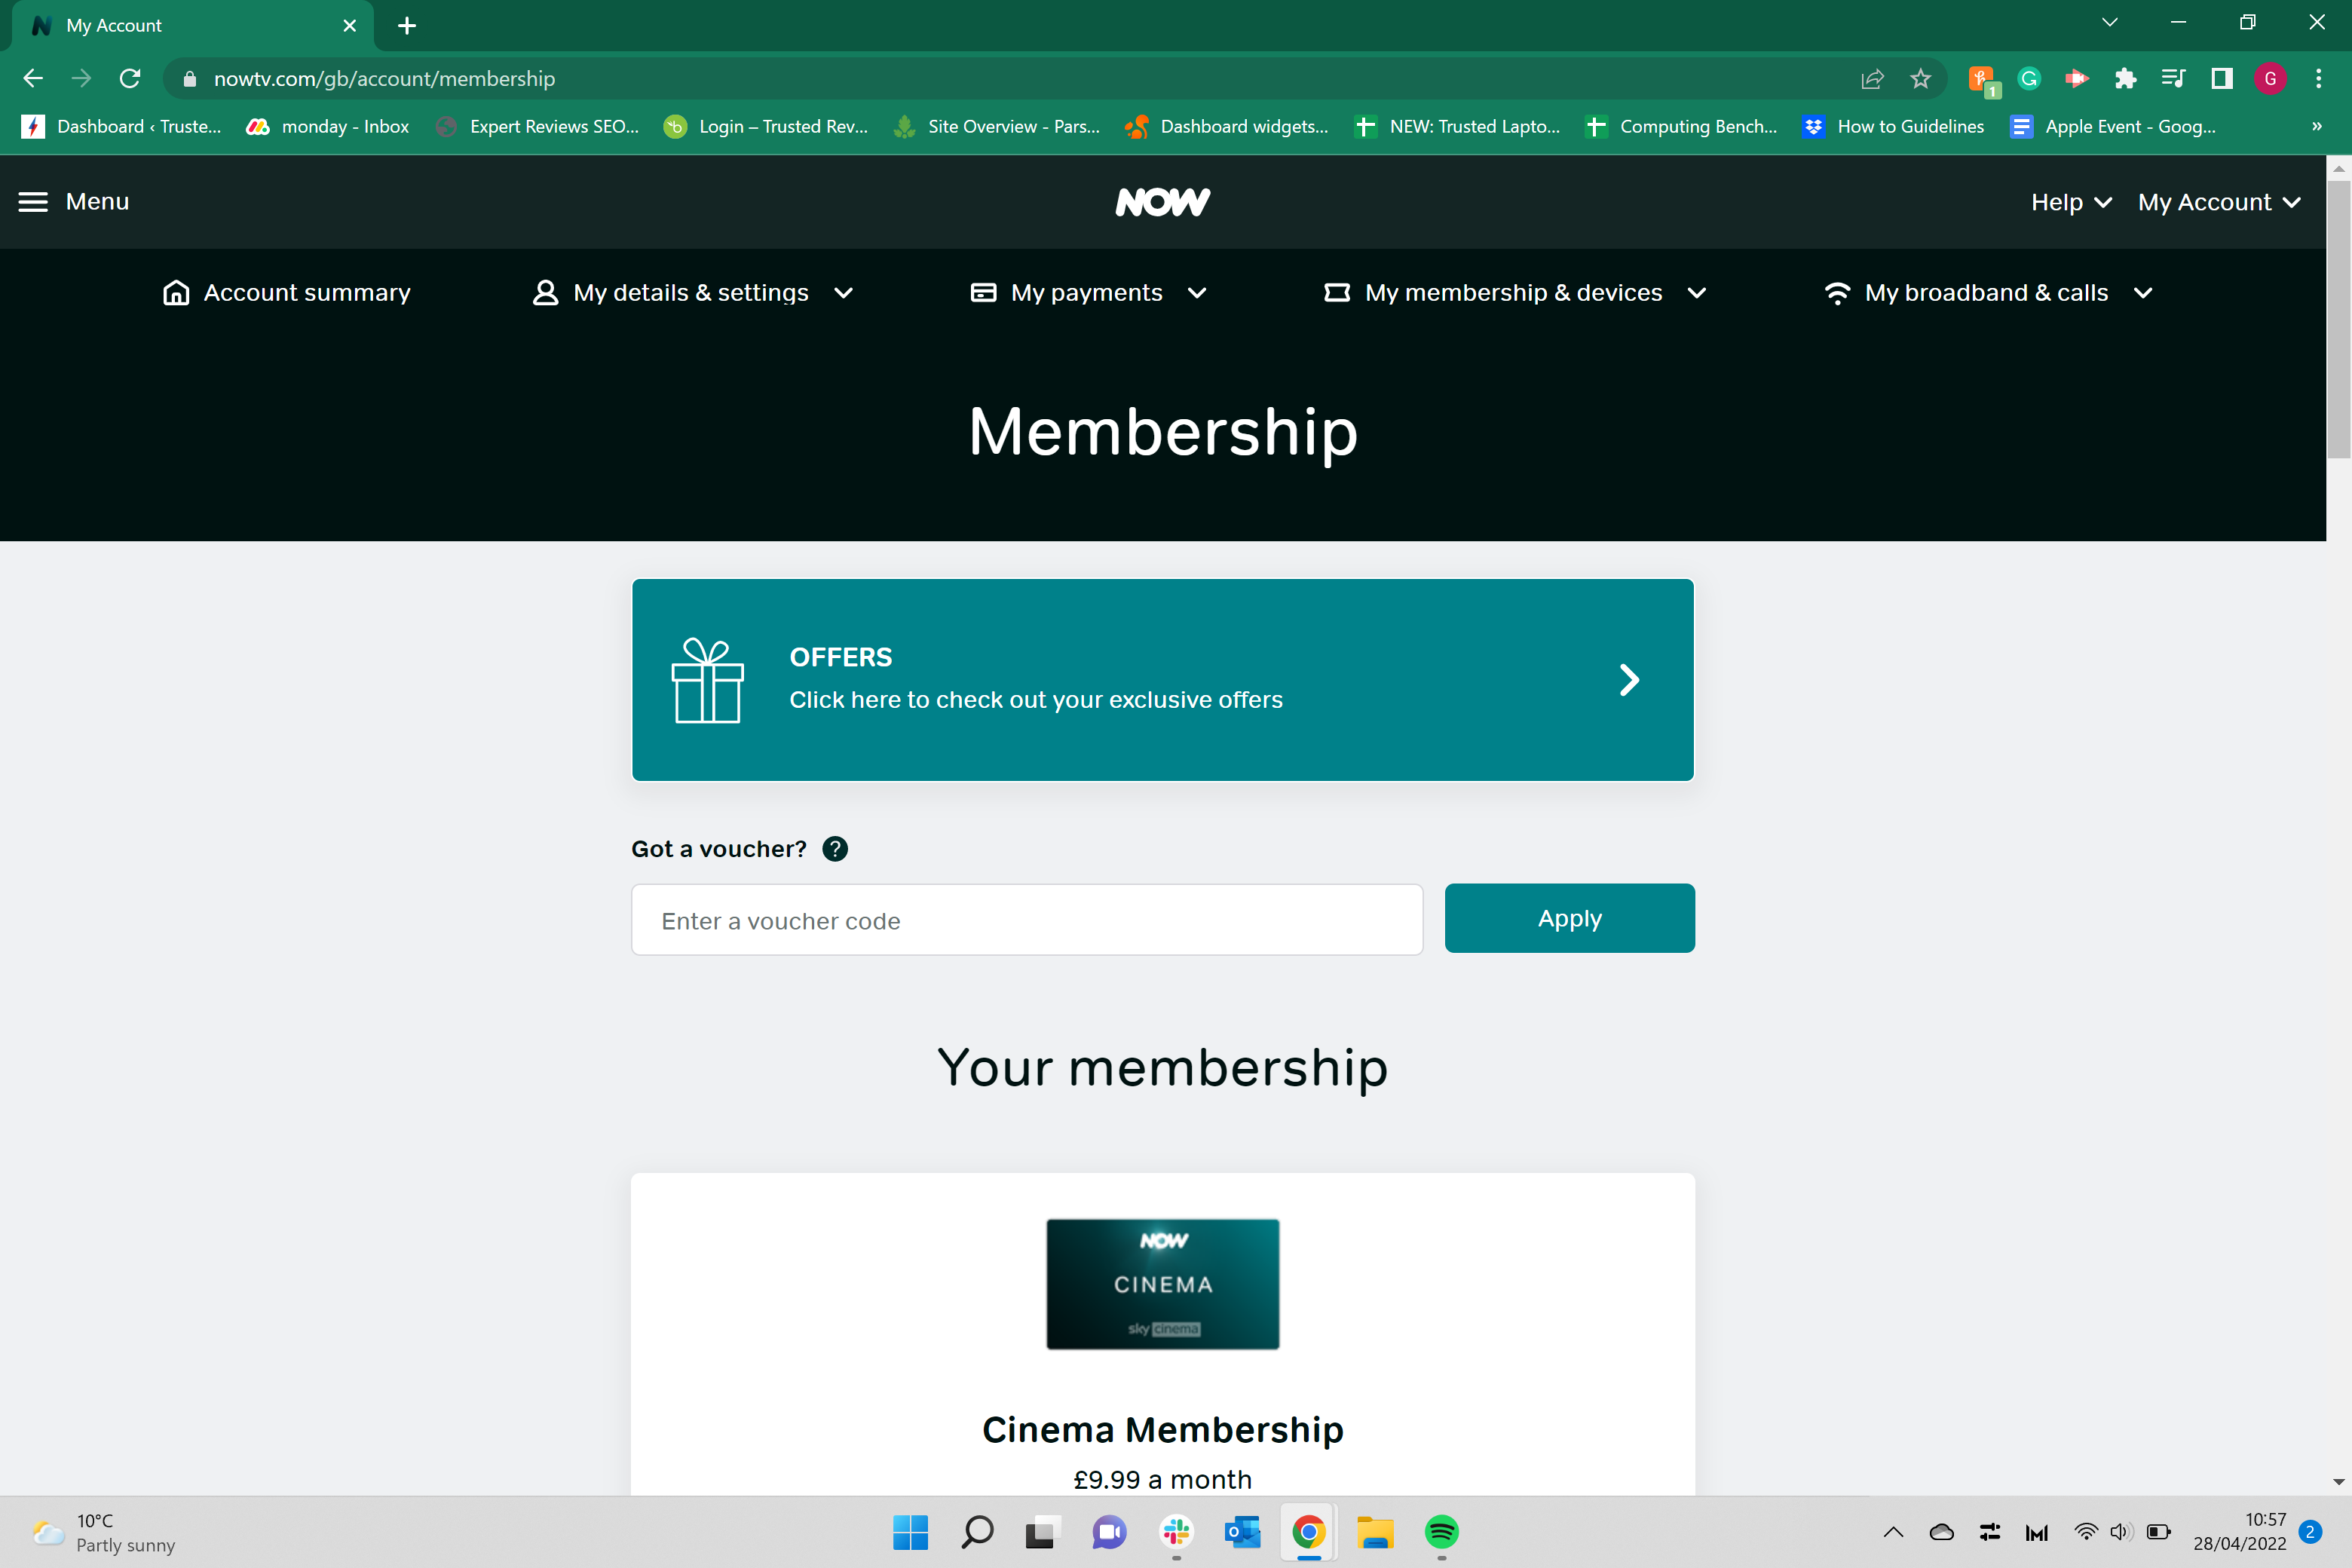 Click on the Cancel membership button